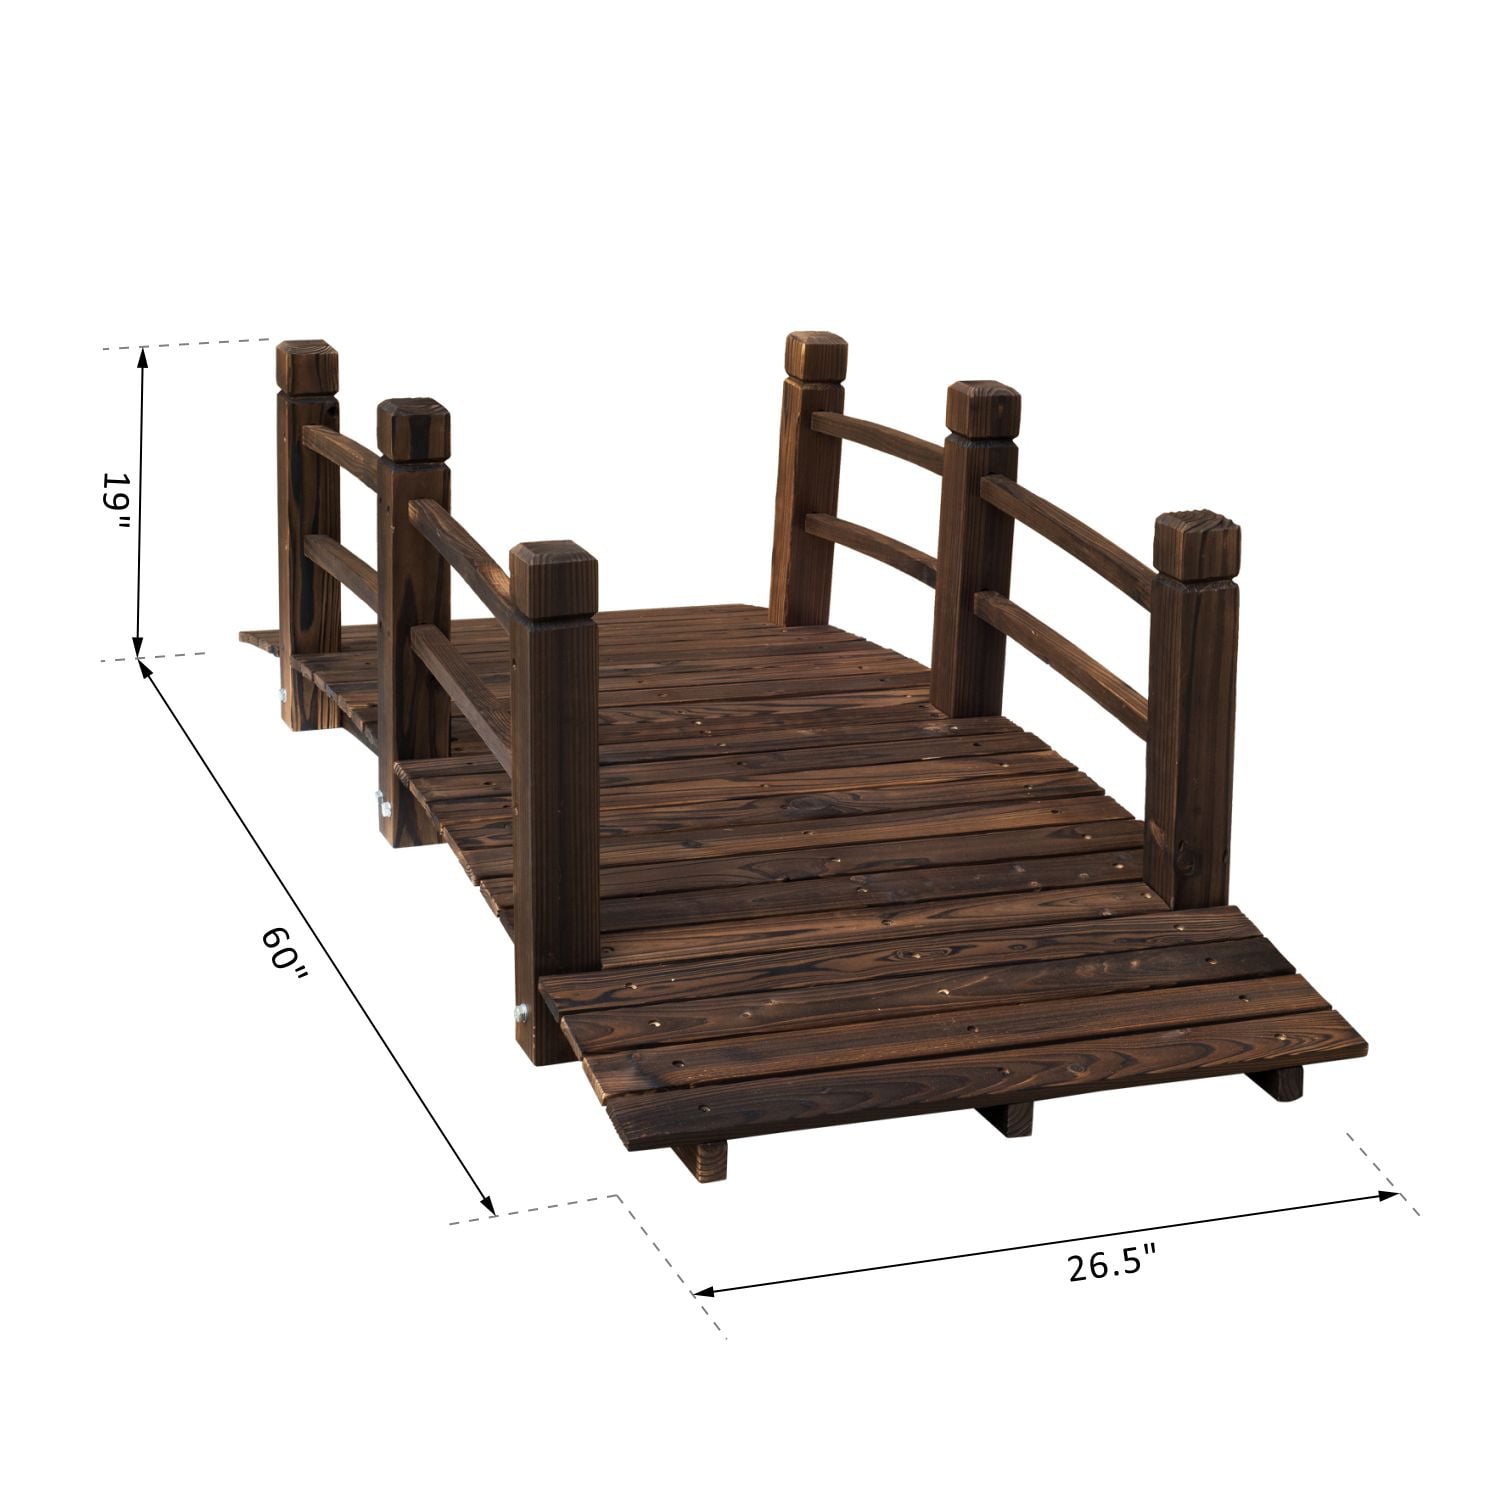 Best Choice Products Wooden Bridge 5 Stained Finish Decorative Solid Wood Garden Pond Bridge New 